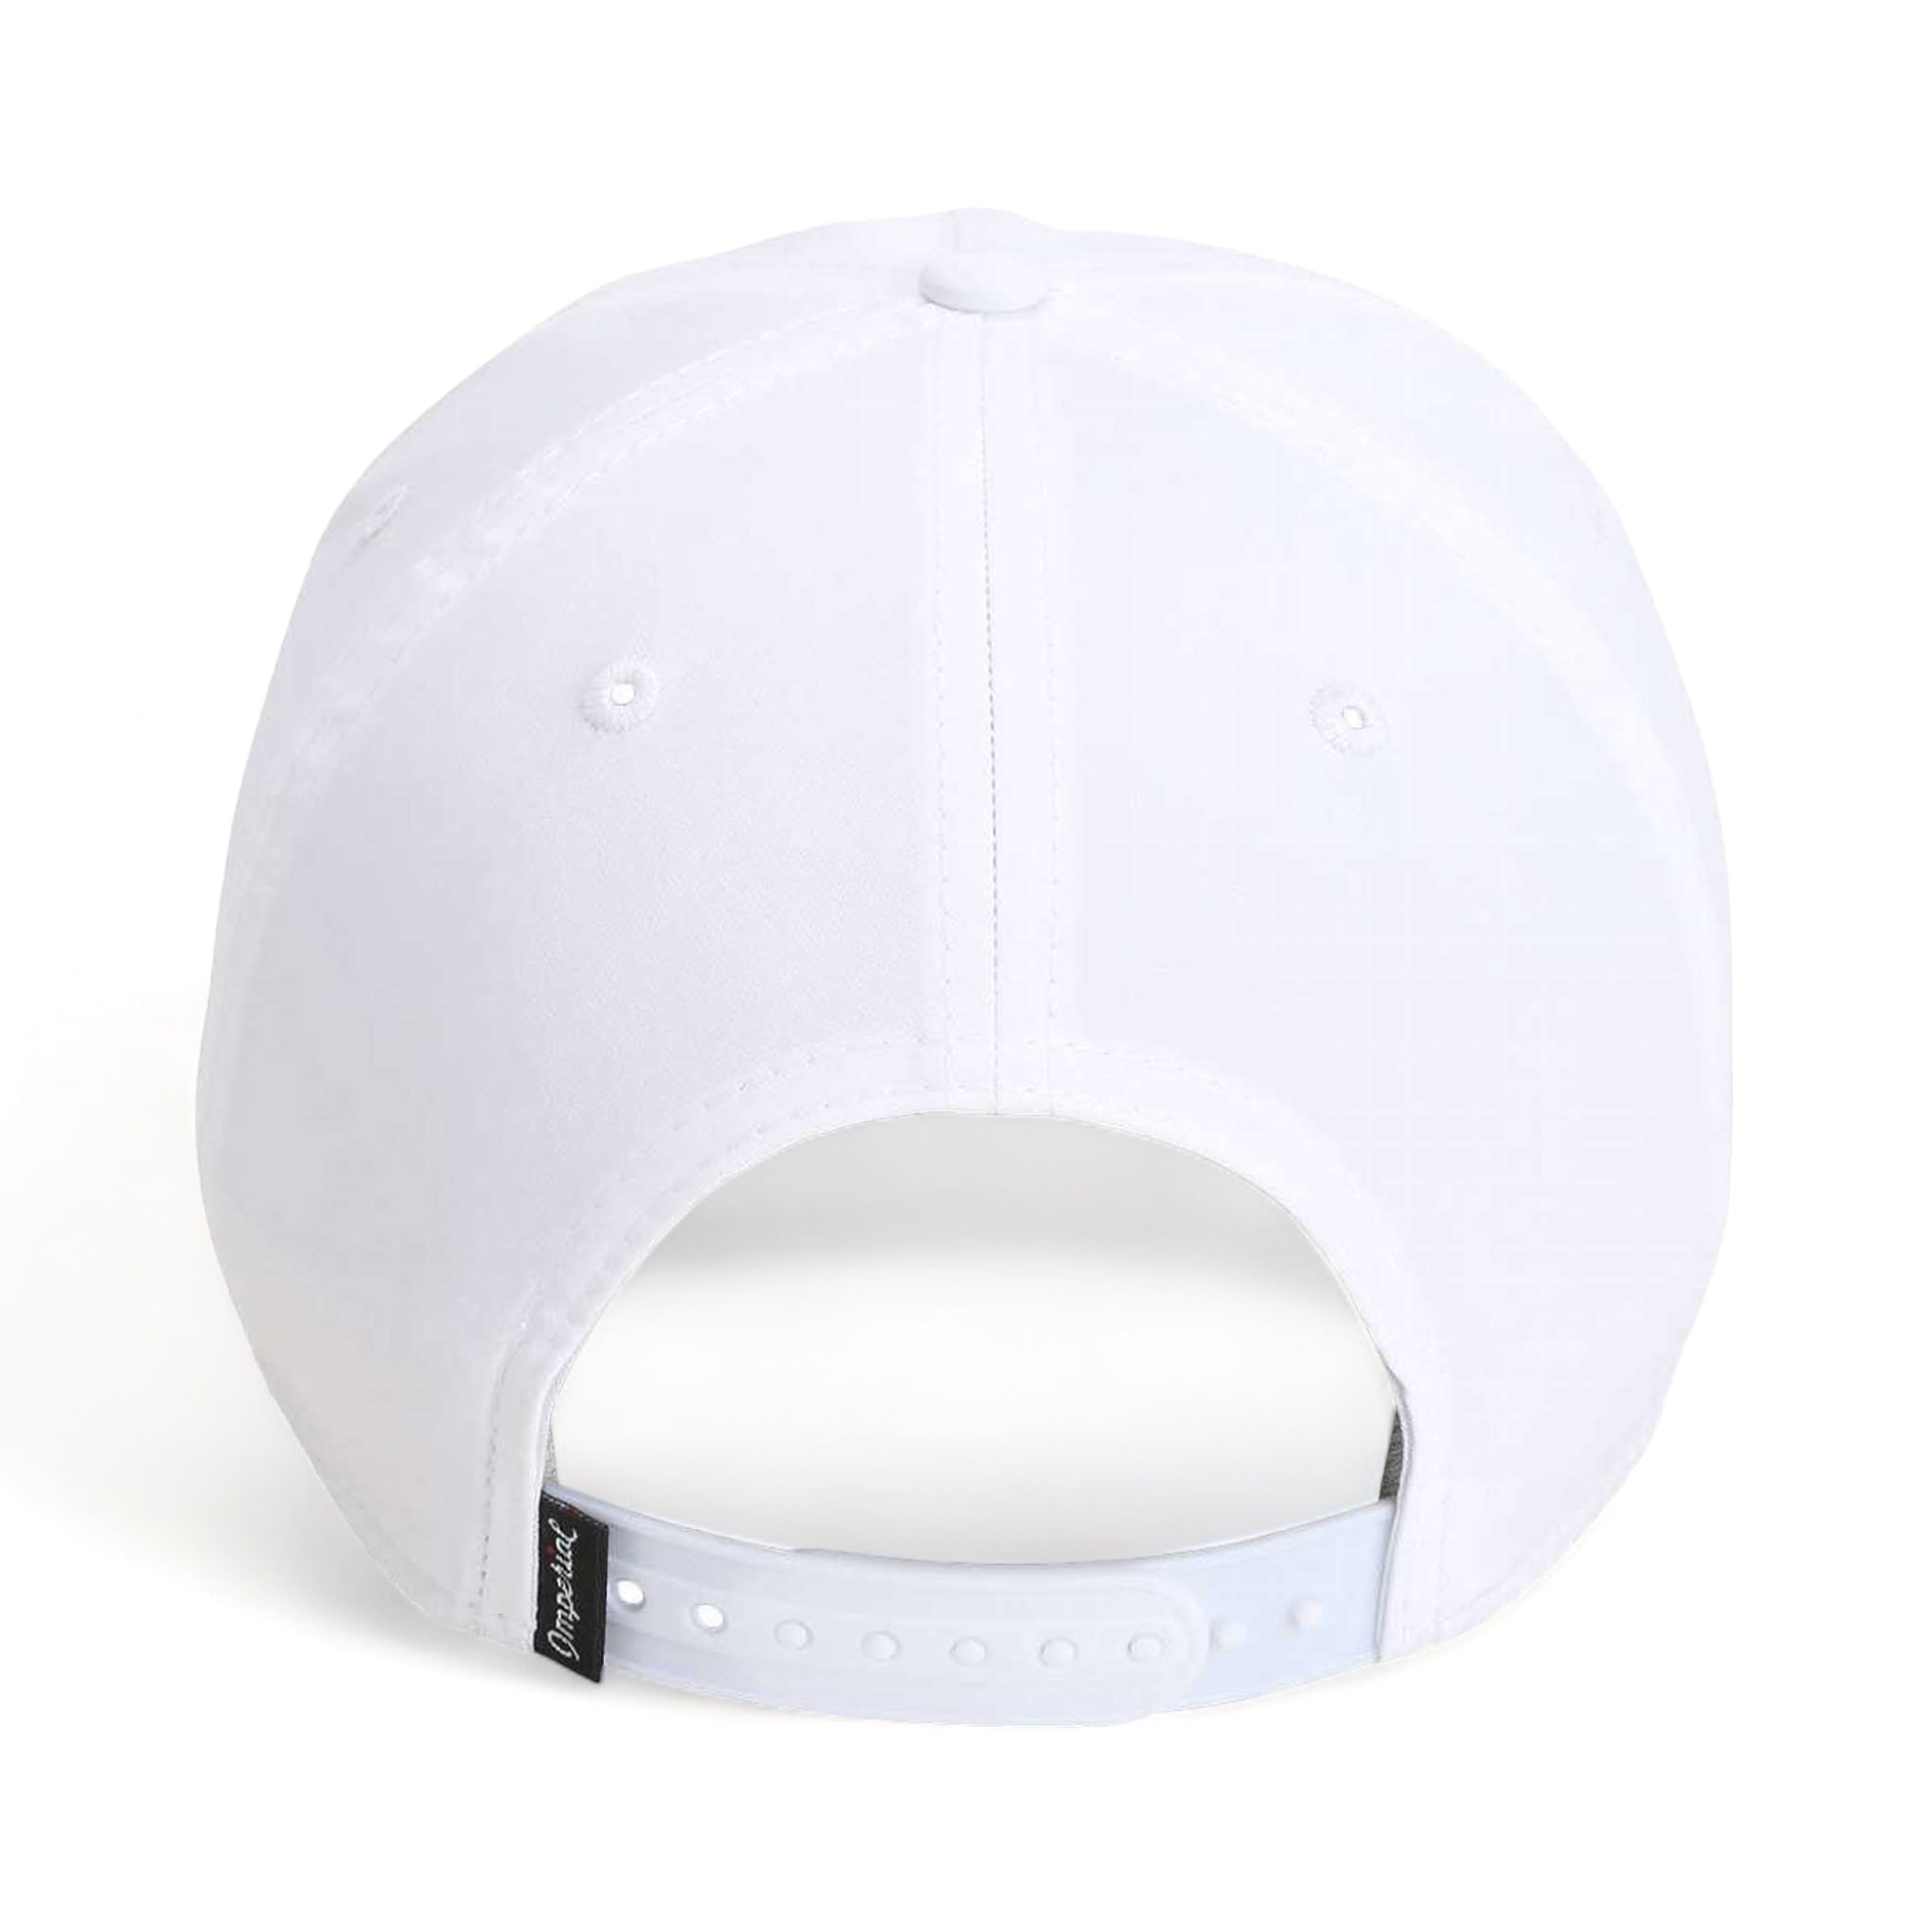 Back view of Imperial 5054 custom hat in white and teal-purple